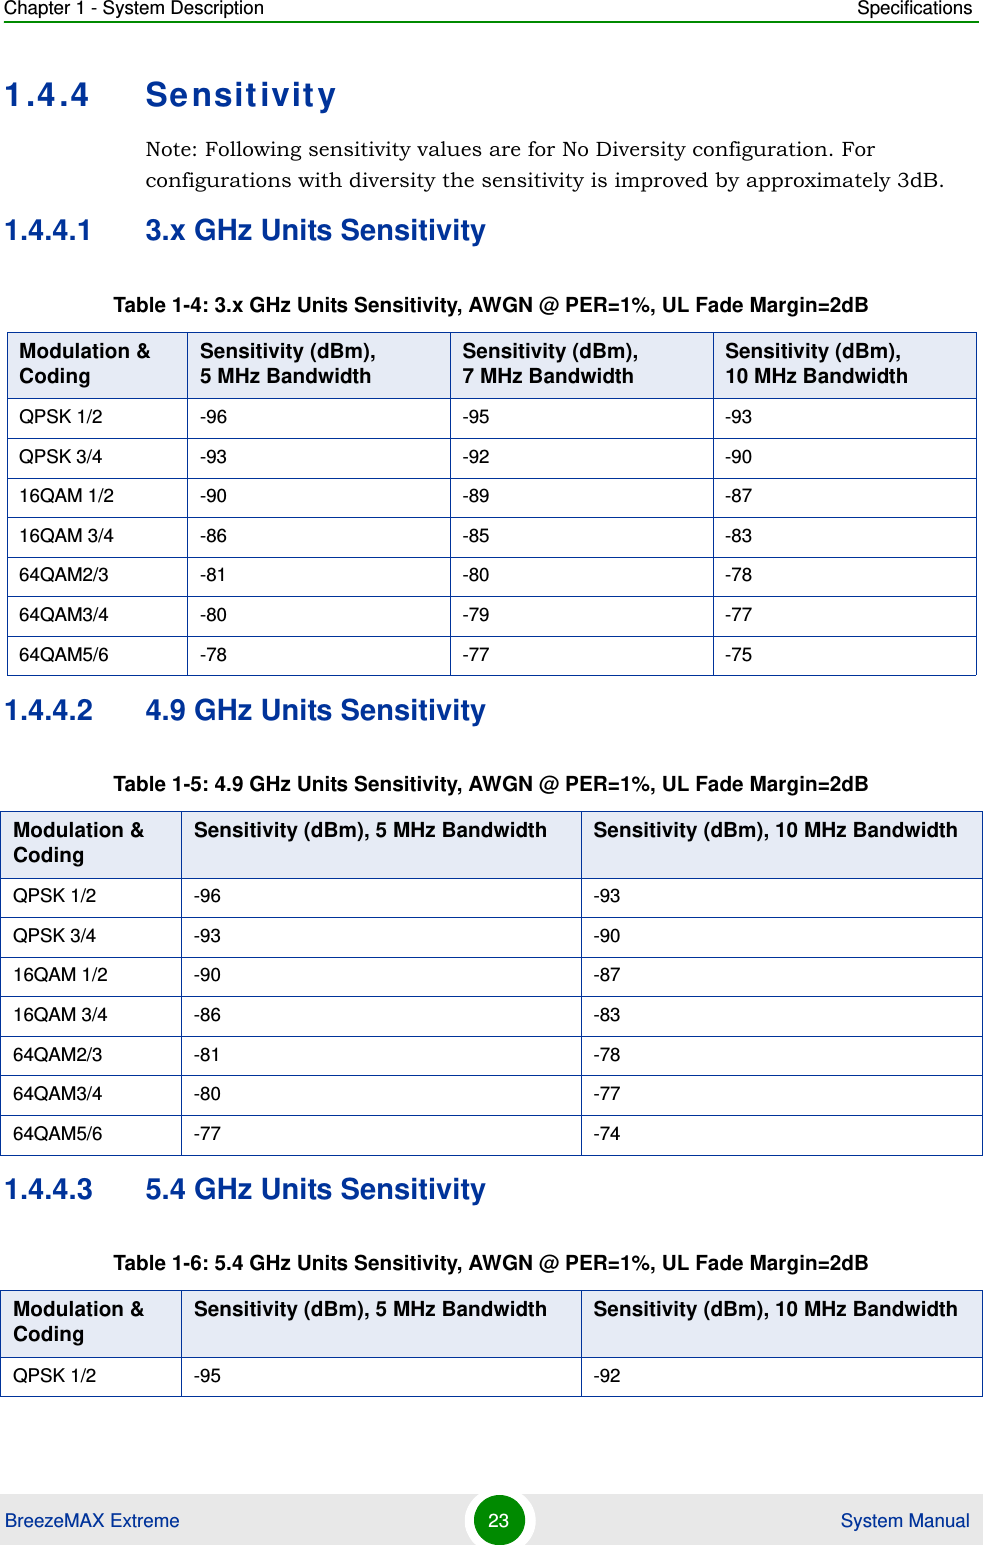 Chapter 1 - System Description SpecificationsBreezeMAX Extreme 23  System Manual1.4.4 SensitivityNote: Following sensitivity values are for No Diversity configuration. For configurations with diversity the sensitivity is improved by approximately 3dB.1.4.4.1 3.x GHz Units Sensitivity1.4.4.2 4.9 GHz Units Sensitivity1.4.4.3 5.4 GHz Units SensitivityTable 1-4: 3.x GHz Units Sensitivity, AWGN @ PER=1%, UL Fade Margin=2dBModulation &amp; Coding Sensitivity (dBm),  5 MHz Bandwidth Sensitivity (dBm),  7 MHz Bandwidth Sensitivity (dBm),  10 MHz BandwidthQPSK 1/2 -96 -95 -93QPSK 3/4 -93 -92 -9016QAM 1/2 -90 -89 -8716QAM 3/4 -86 -85 -8364QAM2/3 -81 -80 -7864QAM3/4 -80 -79 -7764QAM5/6 -78 -77 -75Table 1-5: 4.9 GHz Units Sensitivity, AWGN @ PER=1%, UL Fade Margin=2dBModulation &amp; Coding Sensitivity (dBm), 5 MHz Bandwidth Sensitivity (dBm), 10 MHz BandwidthQPSK 1/2 -96 -93QPSK 3/4 -93 -9016QAM 1/2 -90 -8716QAM 3/4 -86 -8364QAM2/3 -81 -7864QAM3/4 -80 -7764QAM5/6 -77 -74Table 1-6: 5.4 GHz Units Sensitivity, AWGN @ PER=1%, UL Fade Margin=2dBModulation &amp; Coding Sensitivity (dBm), 5 MHz Bandwidth Sensitivity (dBm), 10 MHz BandwidthQPSK 1/2 -95 -92